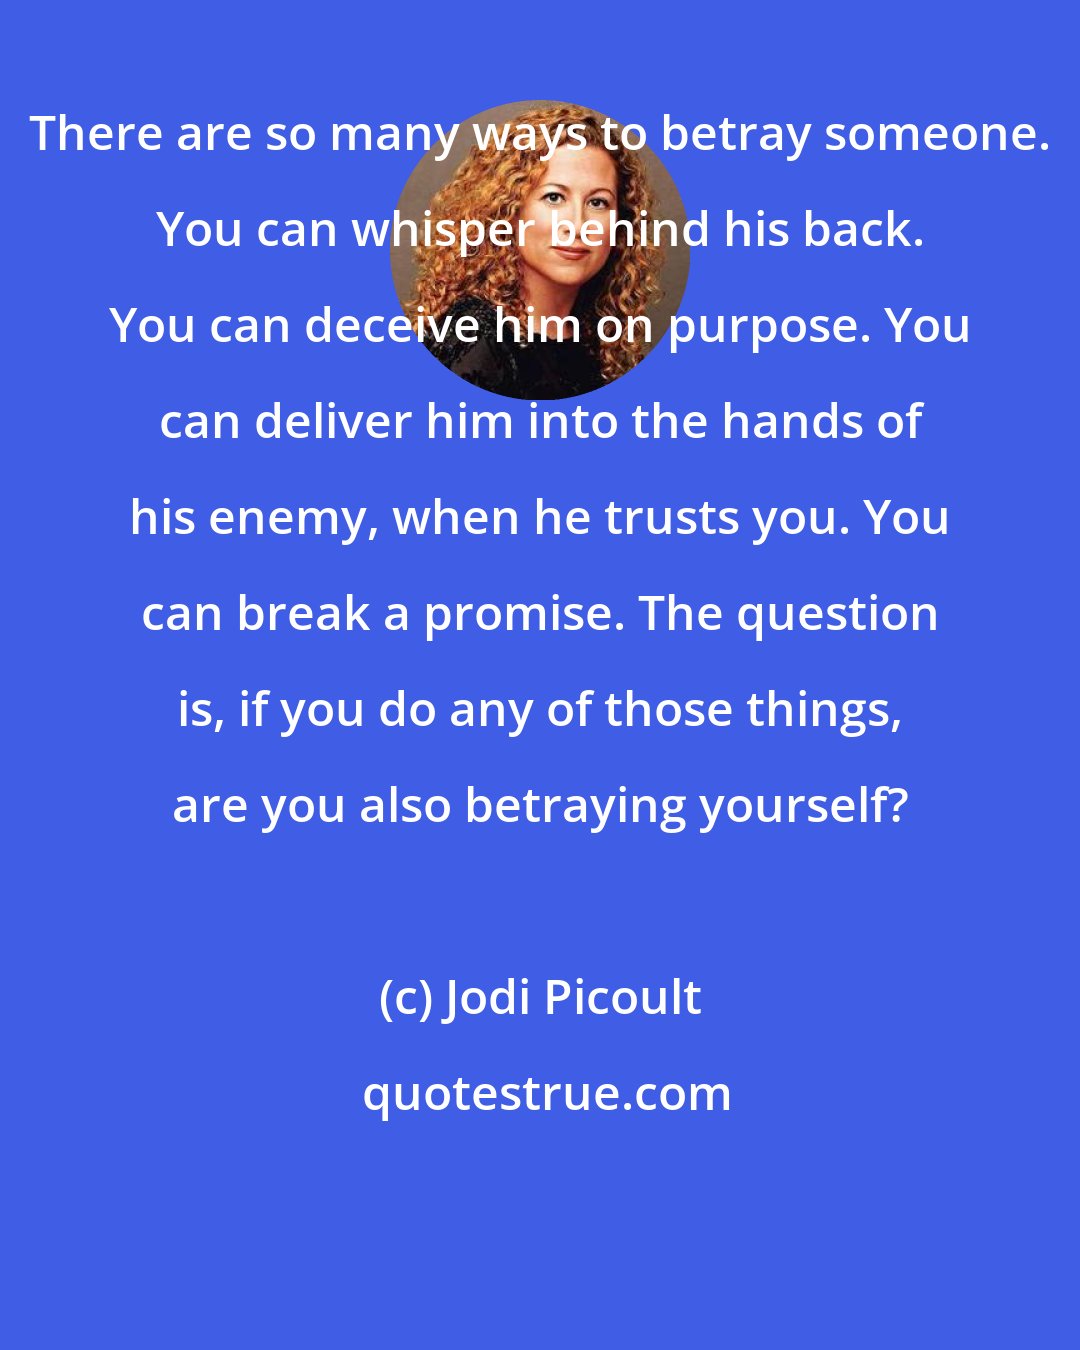 Jodi Picoult: There are so many ways to betray someone. You can whisper behind his back. You can deceive him on purpose. You can deliver him into the hands of his enemy, when he trusts you. You can break a promise. The question is, if you do any of those things, are you also betraying yourself?